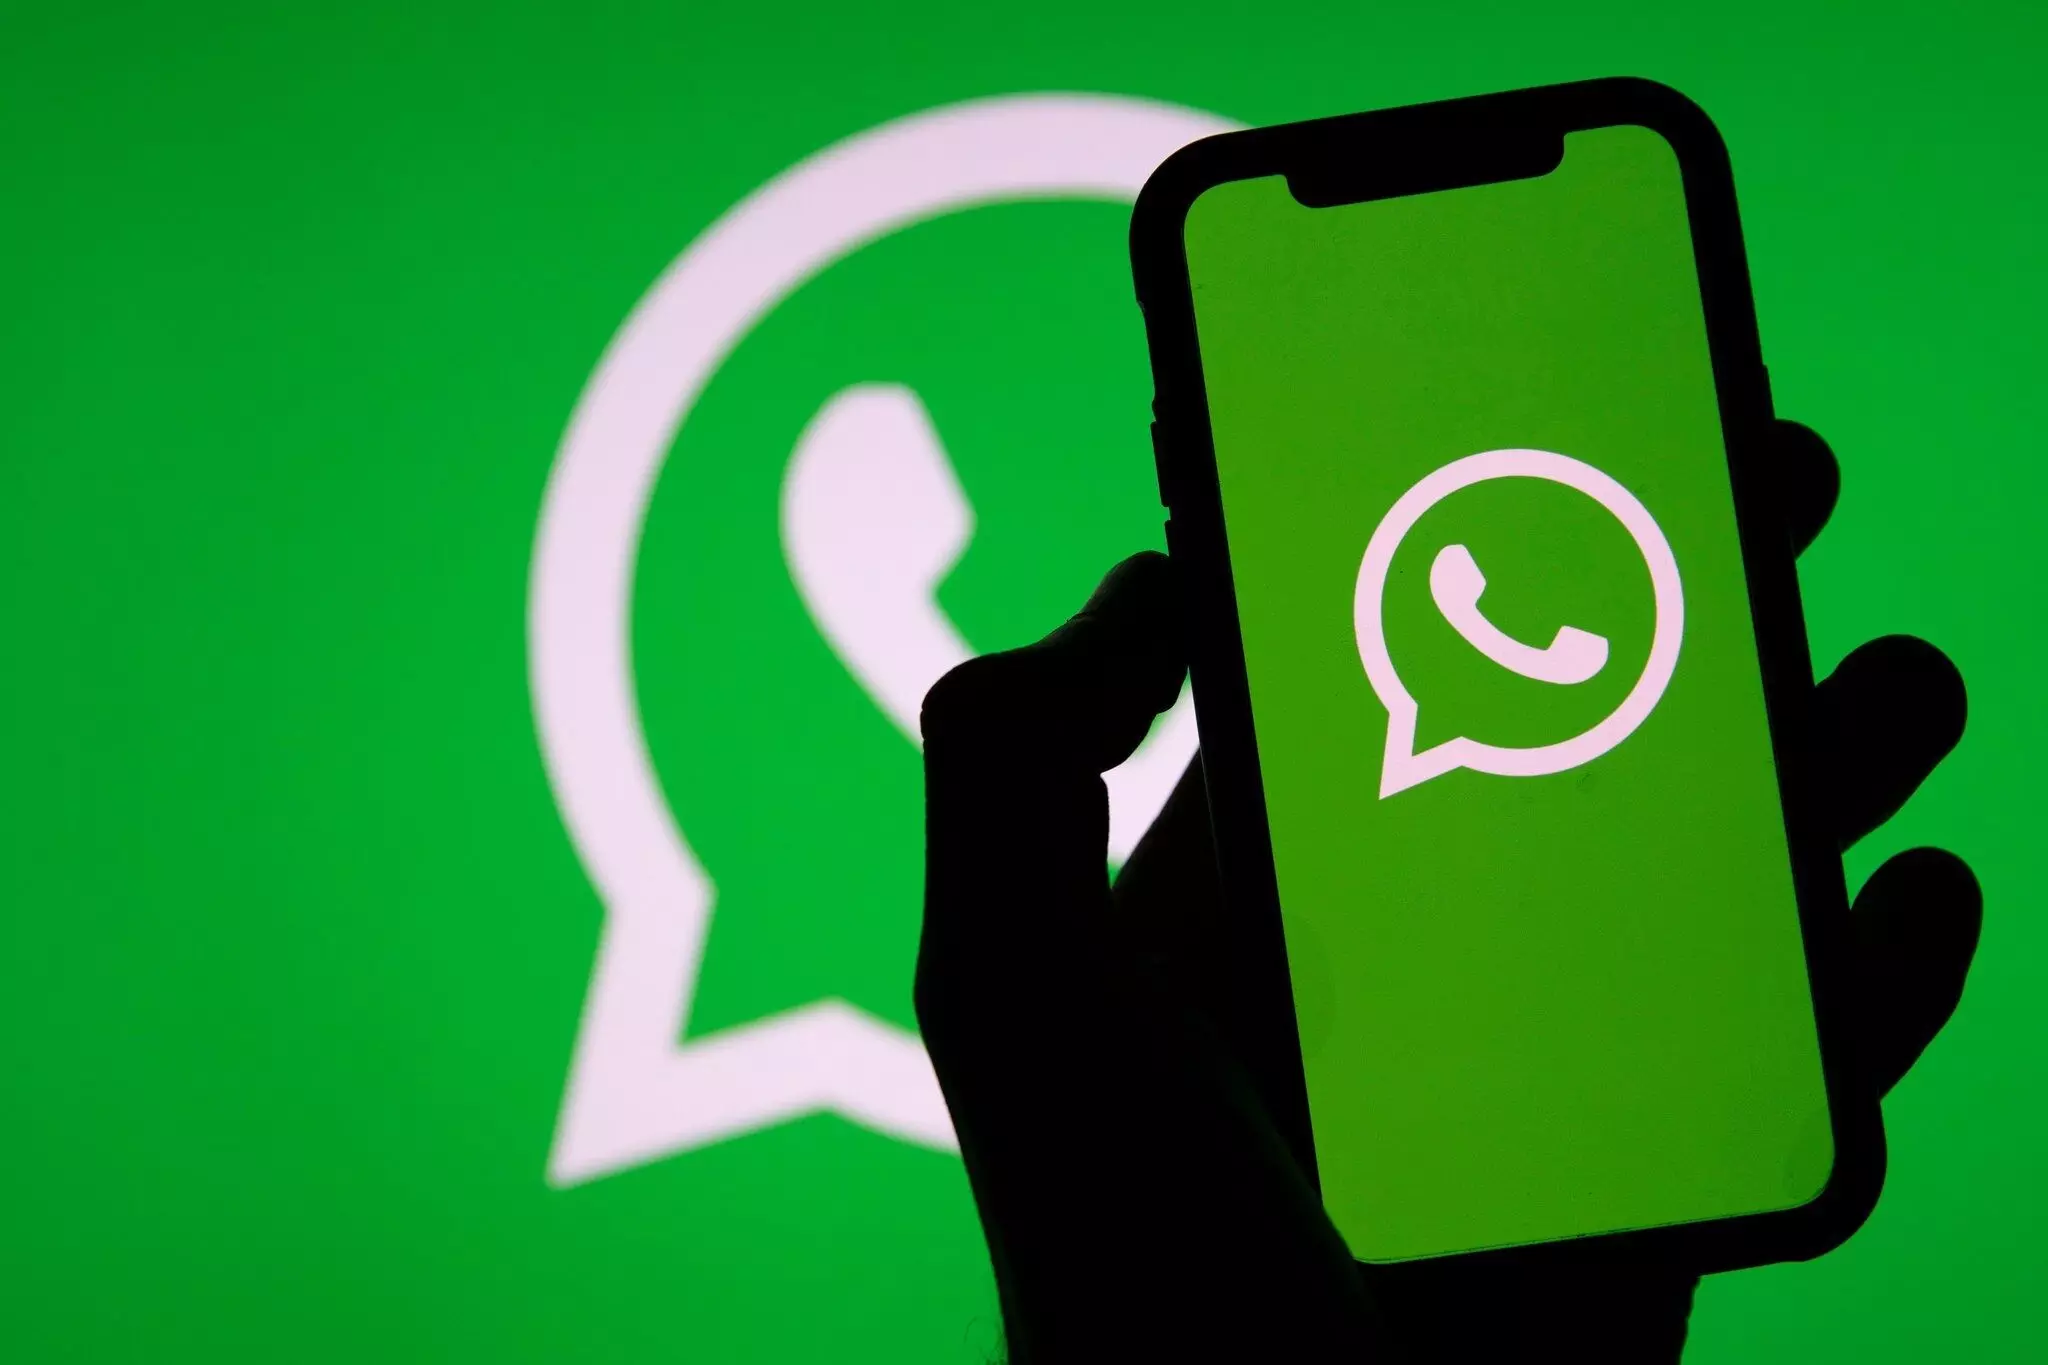 WhatsApps global voice message player is now available for beta testers on iOS